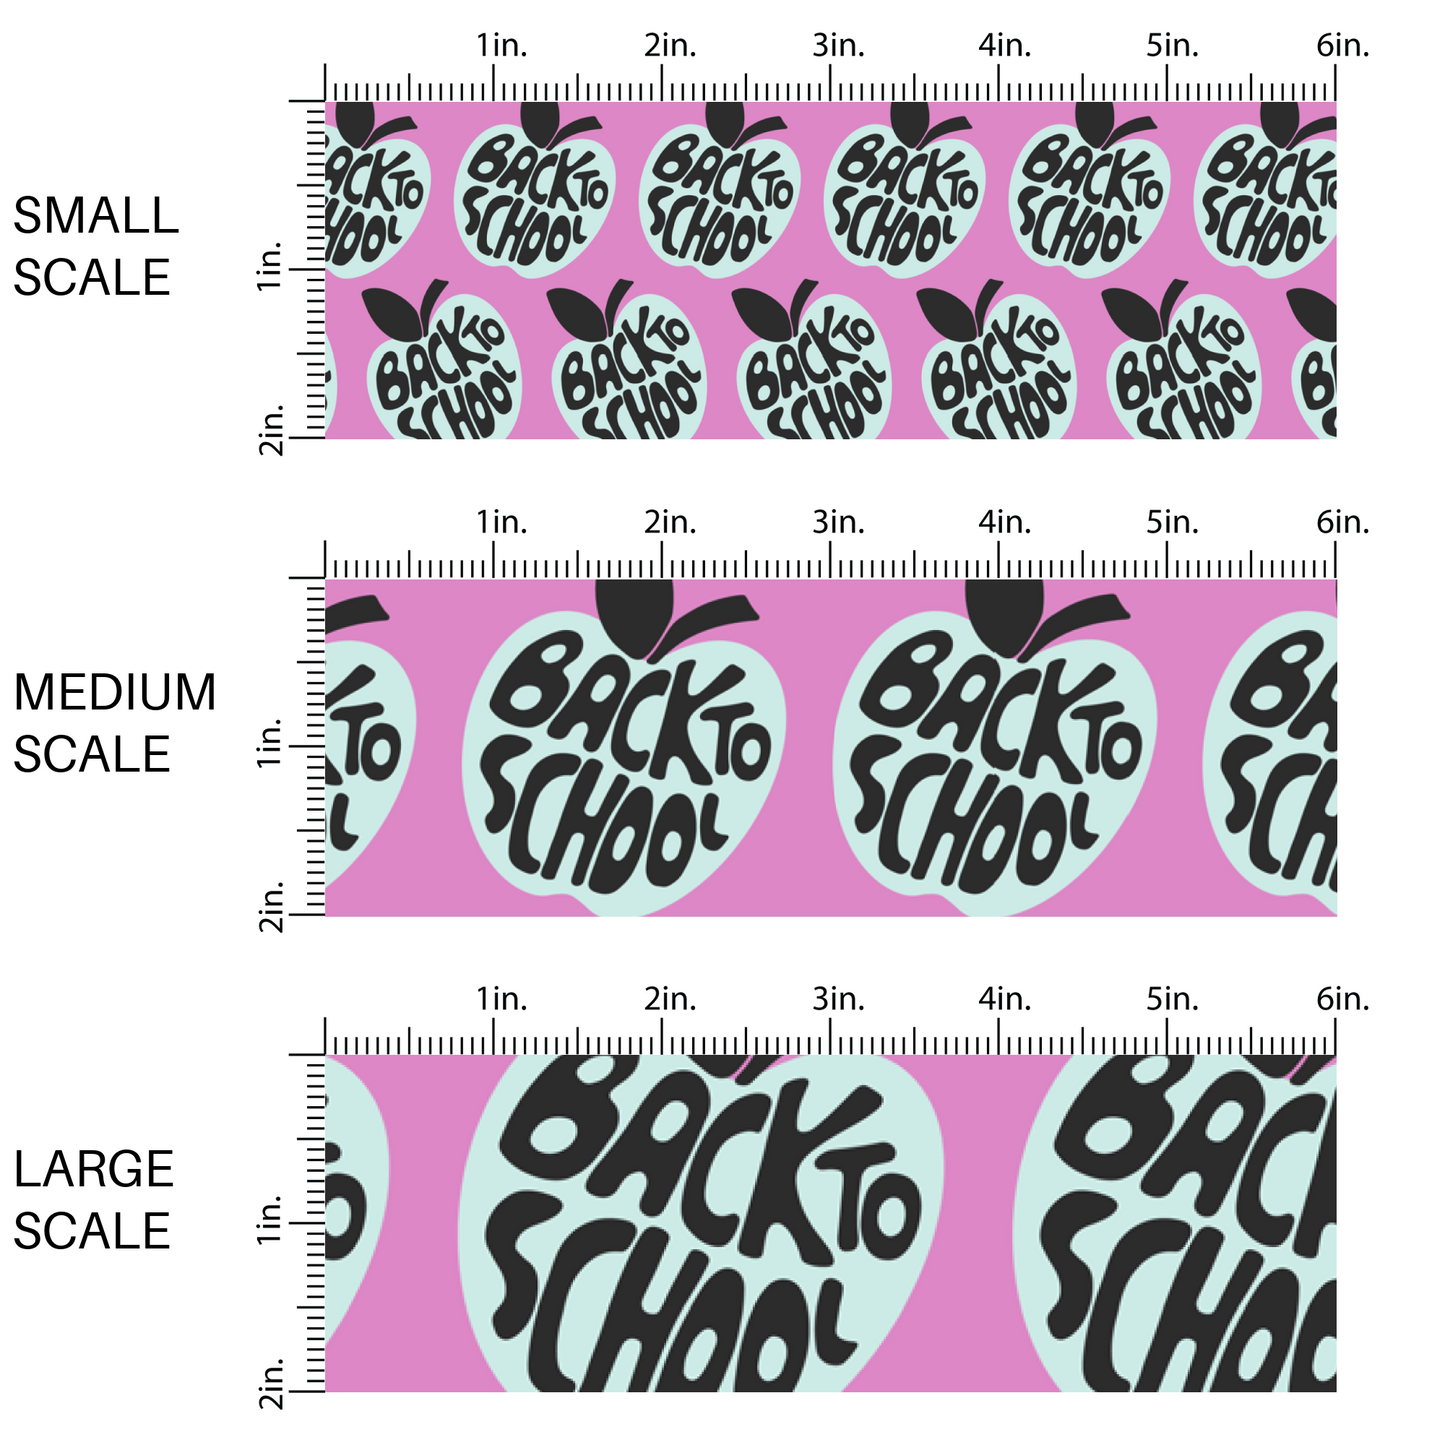 Pink fabric by the yard scaled image guide with aqua apples the say "Back to school".